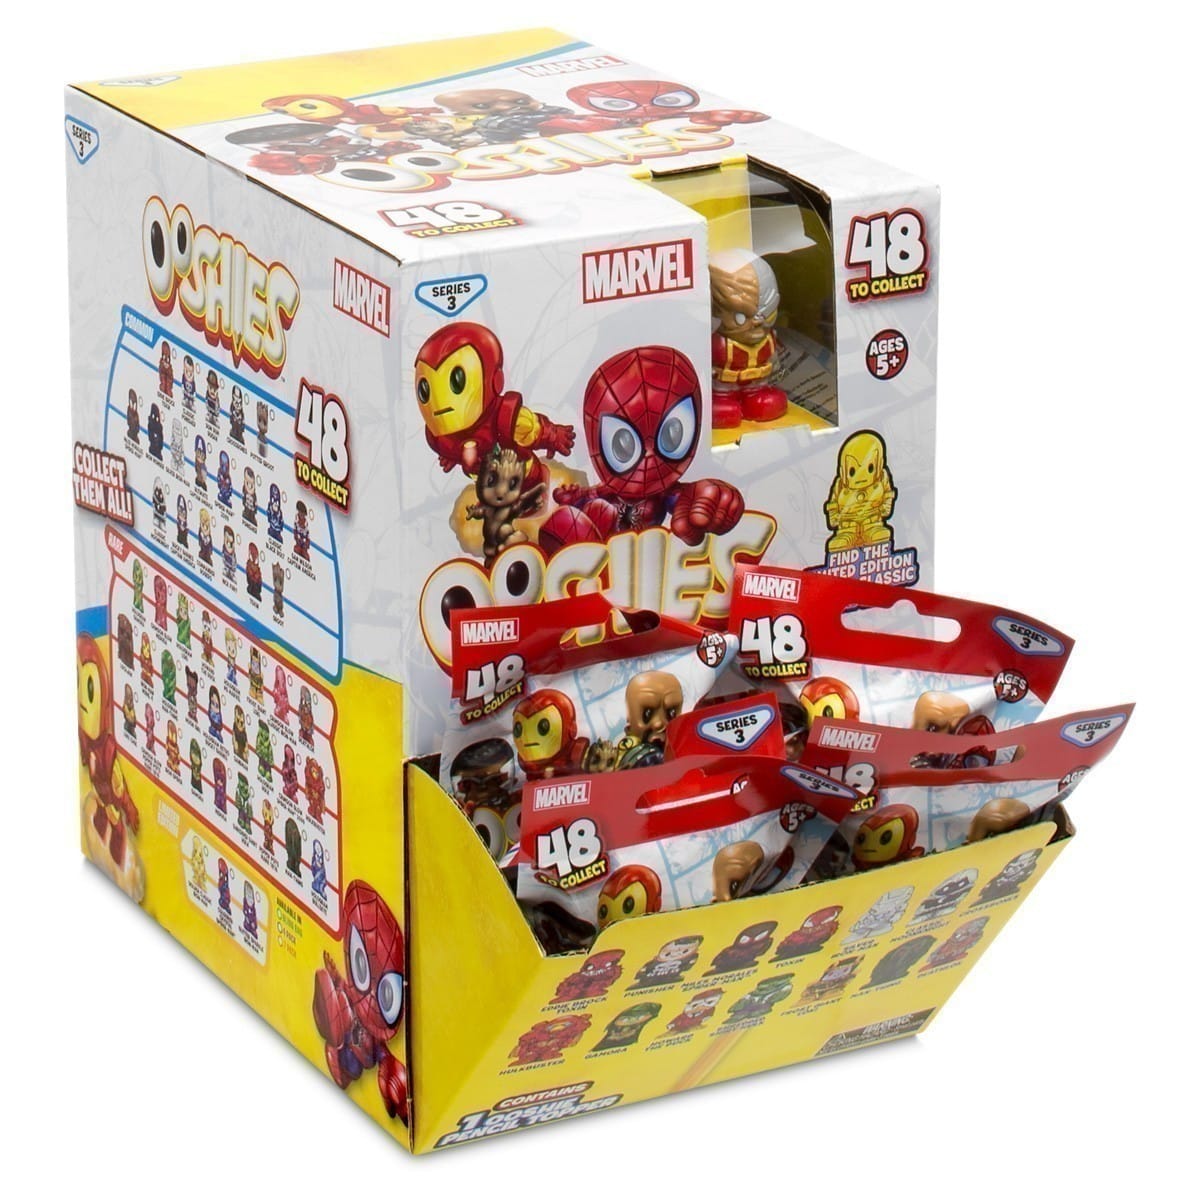 Ooshies Pencil Toppers - Series 3 - Marvel Blind Bag